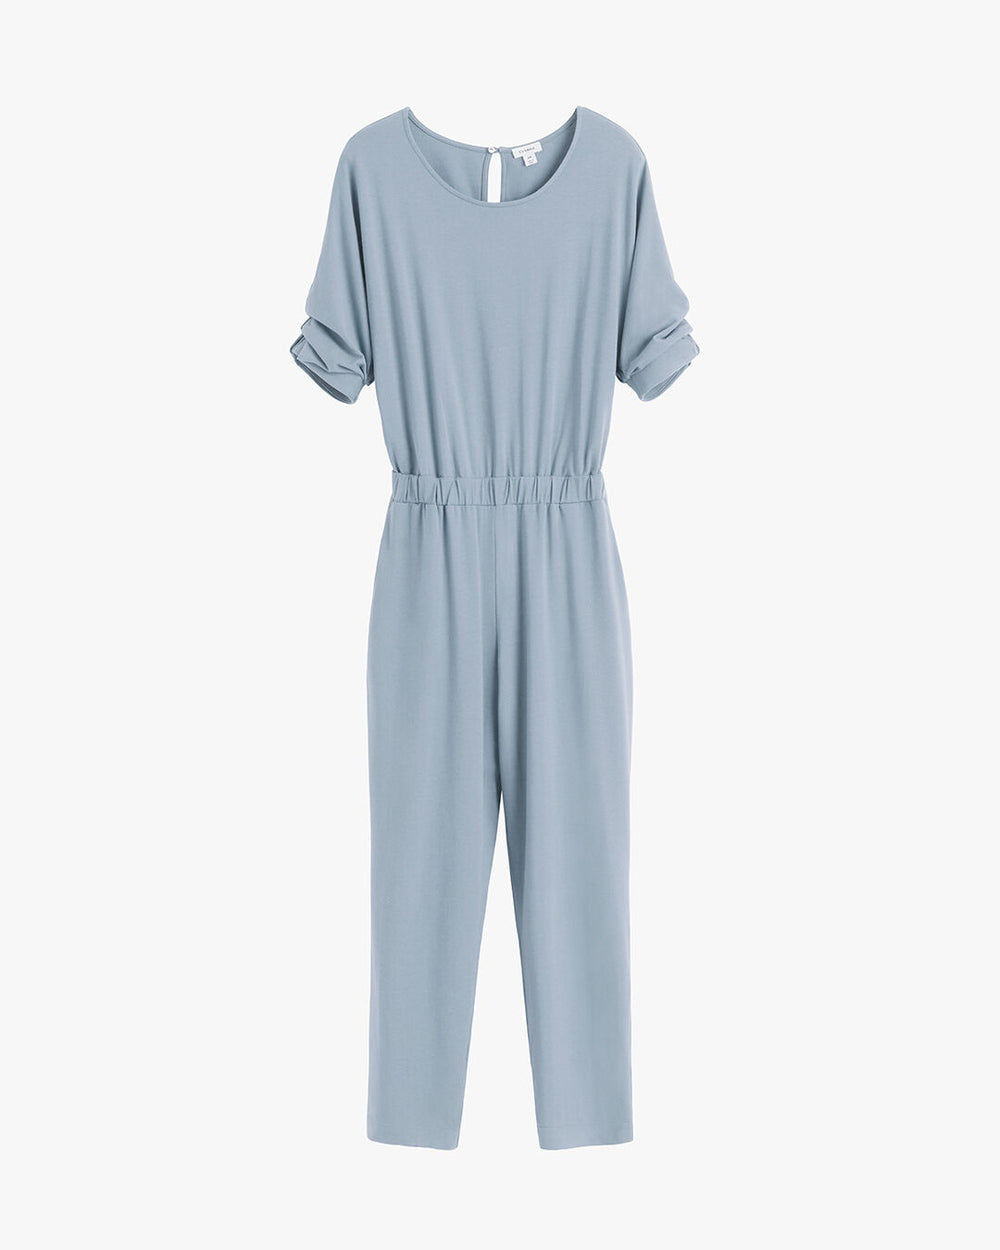 A short-sleeved jumpsuit with elastic waist on a white background.